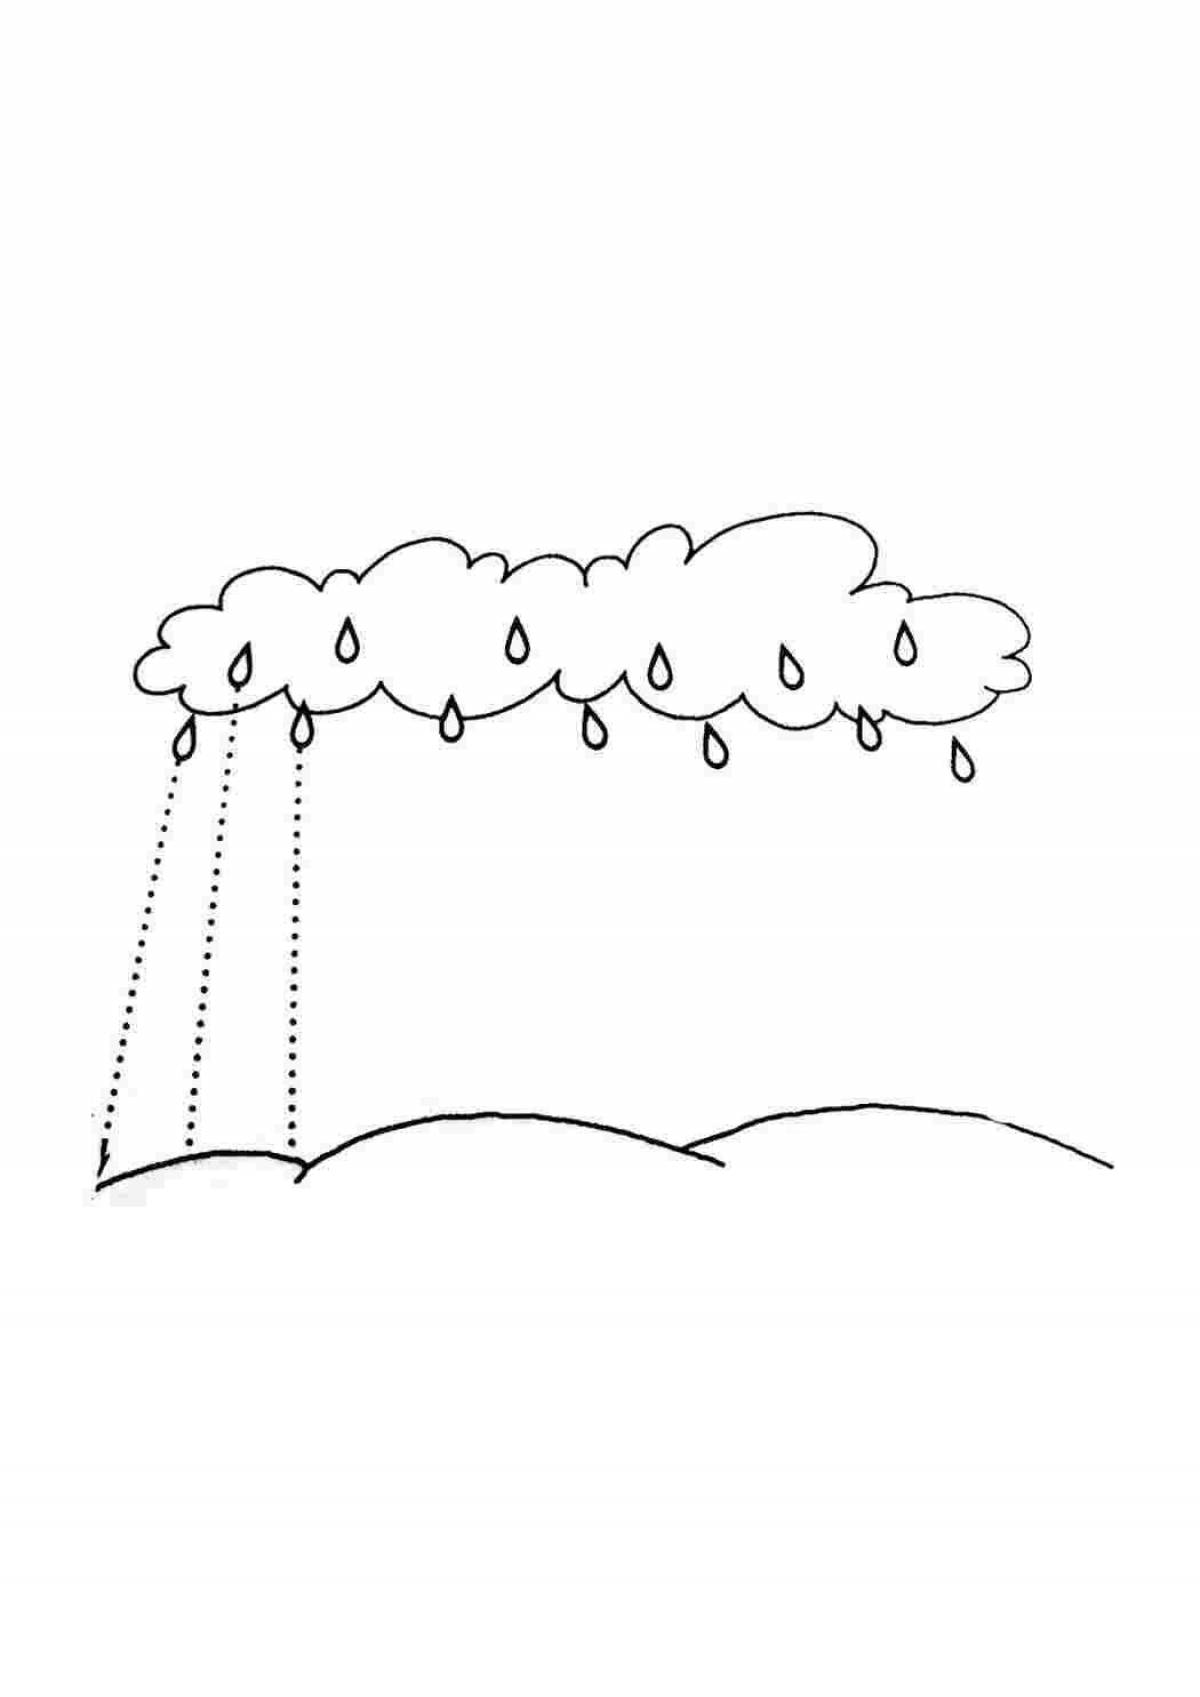 Gorgeous rain coloring book for kids